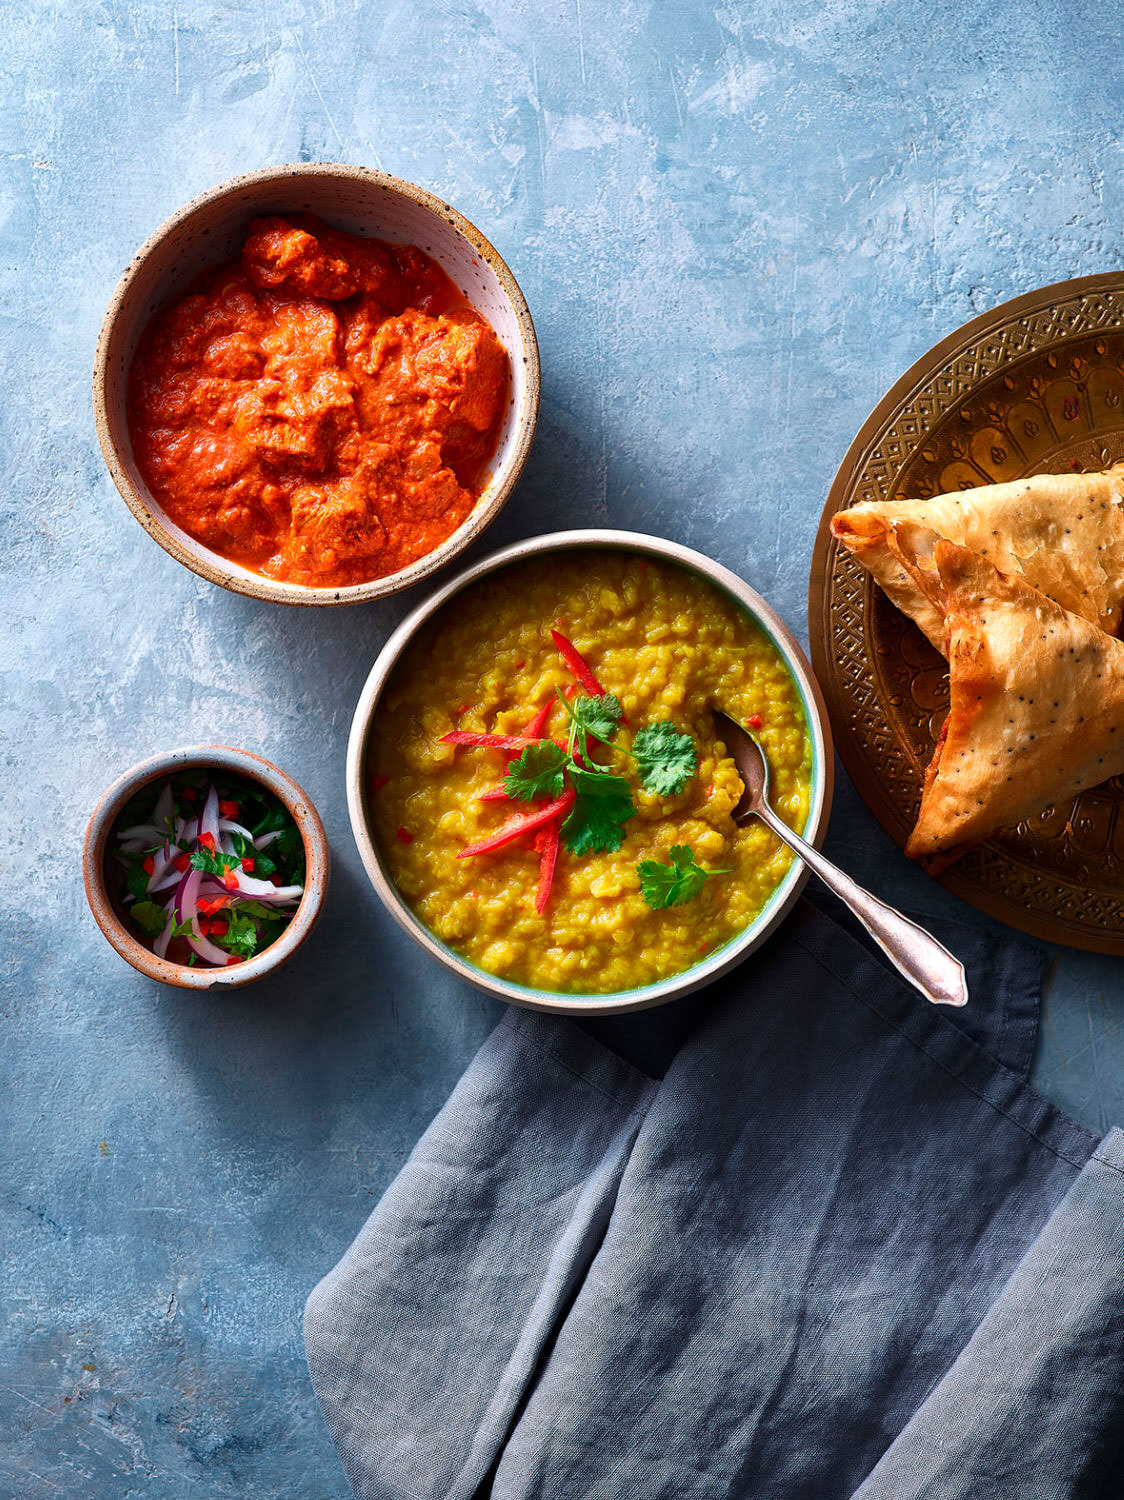 Tarka Dhal in a bowl served with samosas and curries